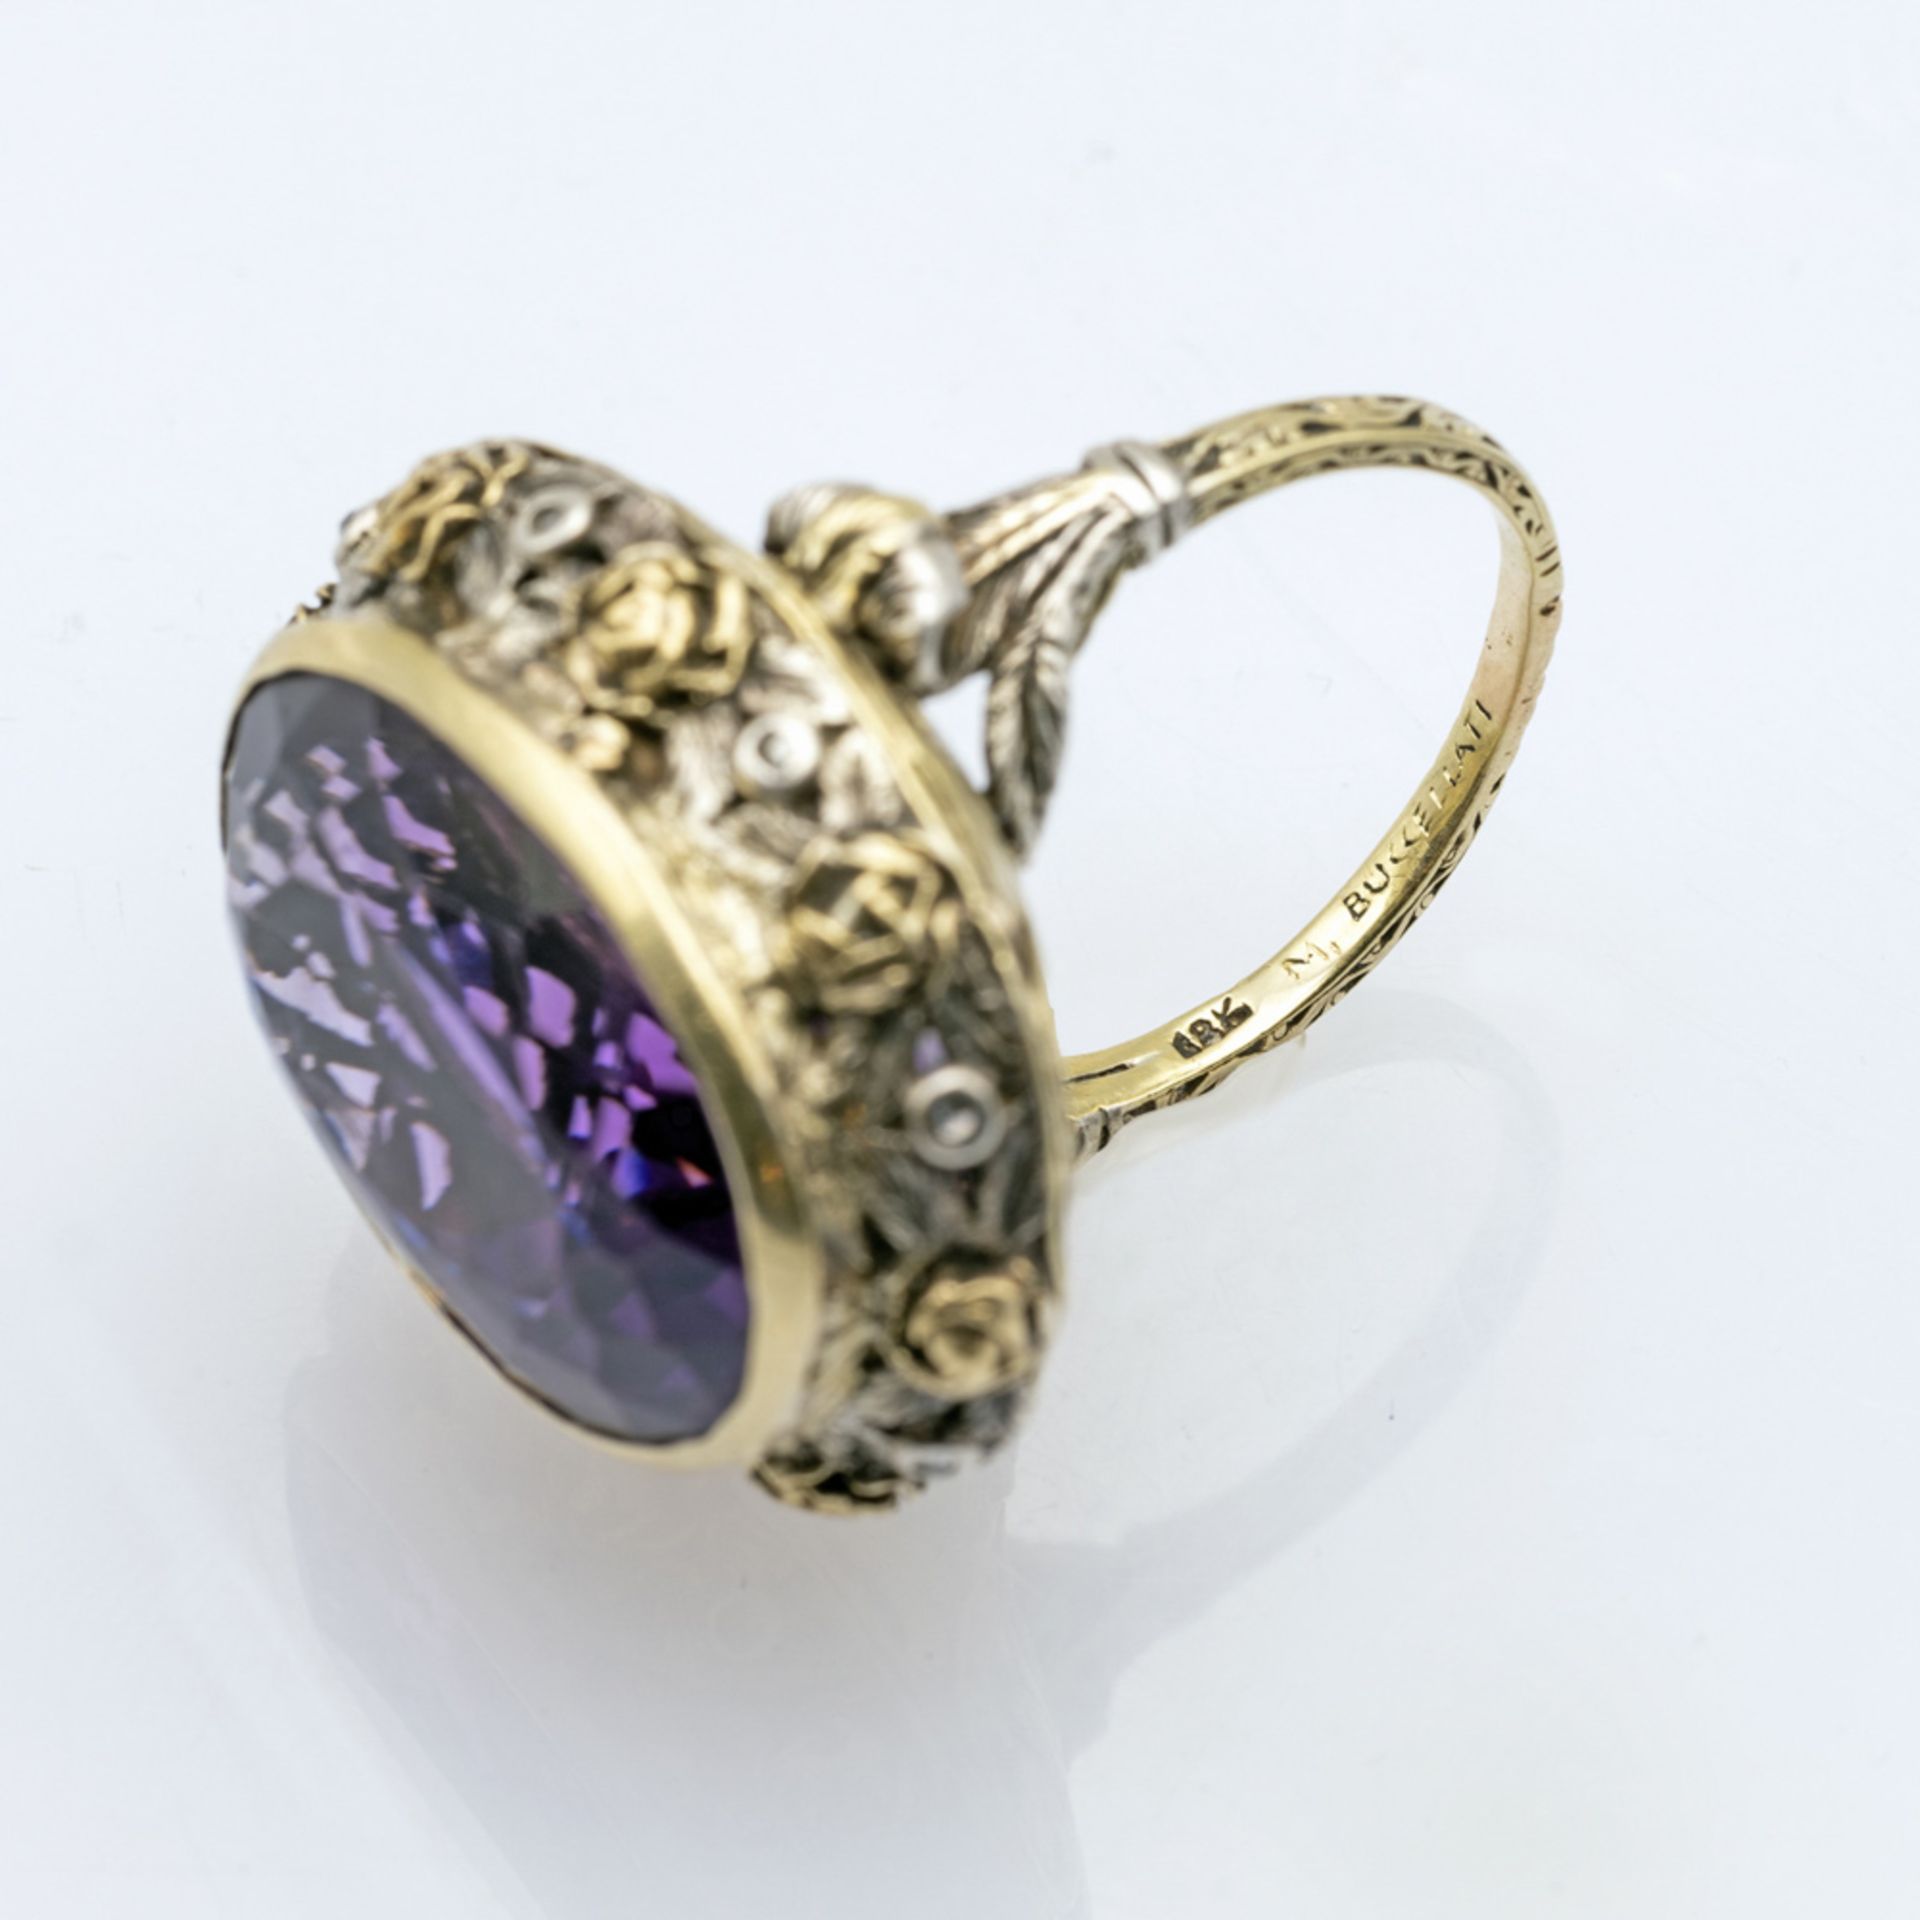 Mario Buccellati, 18kt yellow gold and silver ring with amethyst - Image 2 of 2